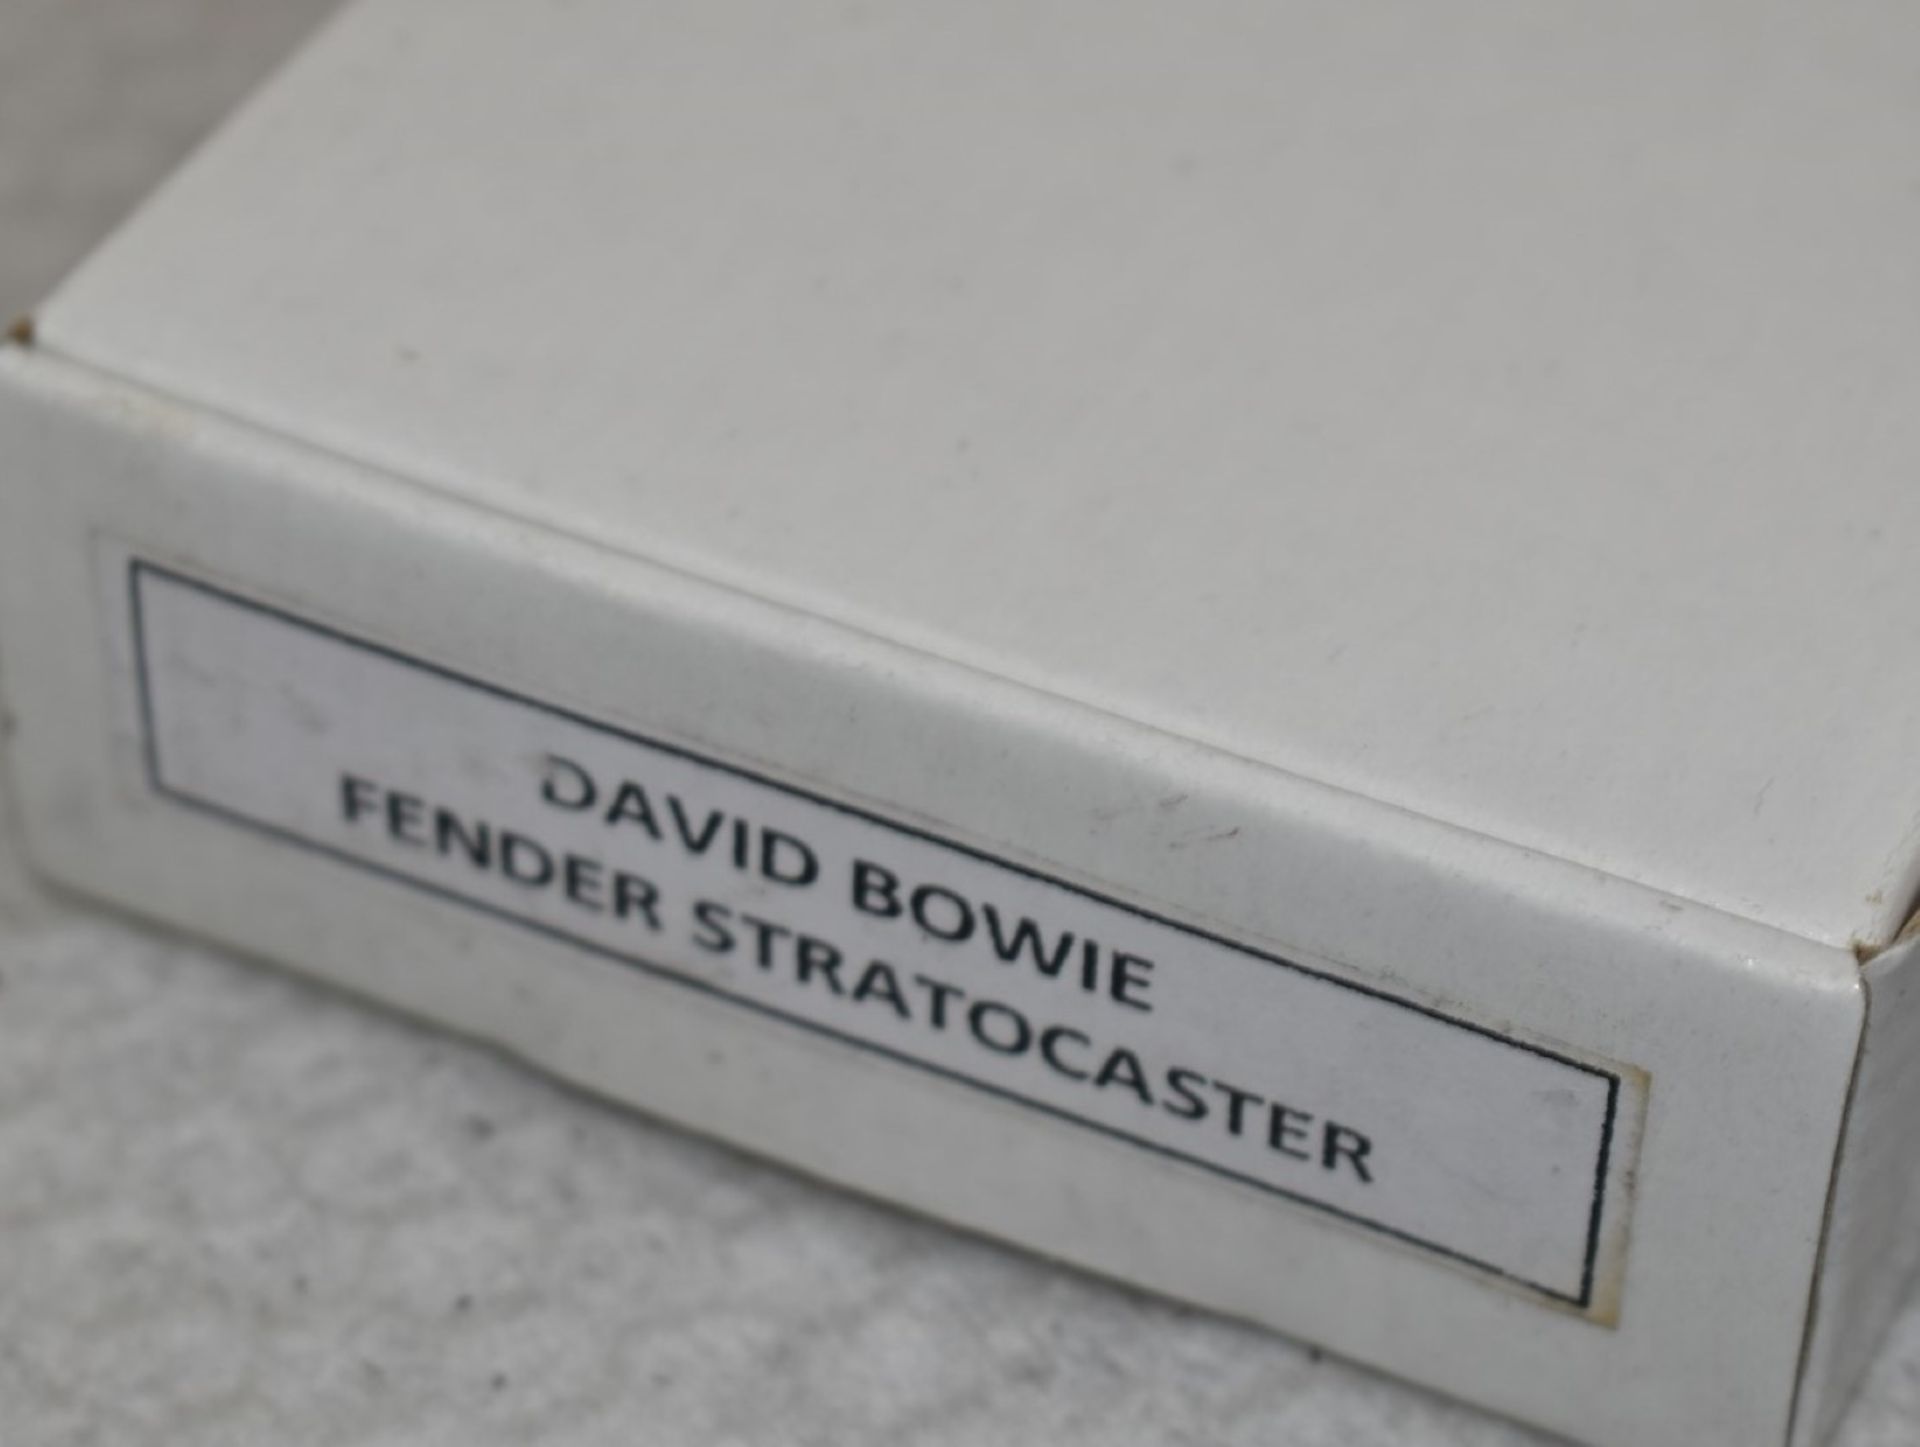 1 x Miniature Hand Made Guitar - David Bowie Fender Stratocaster - New & Unused - RRP £35 - Image 3 of 5